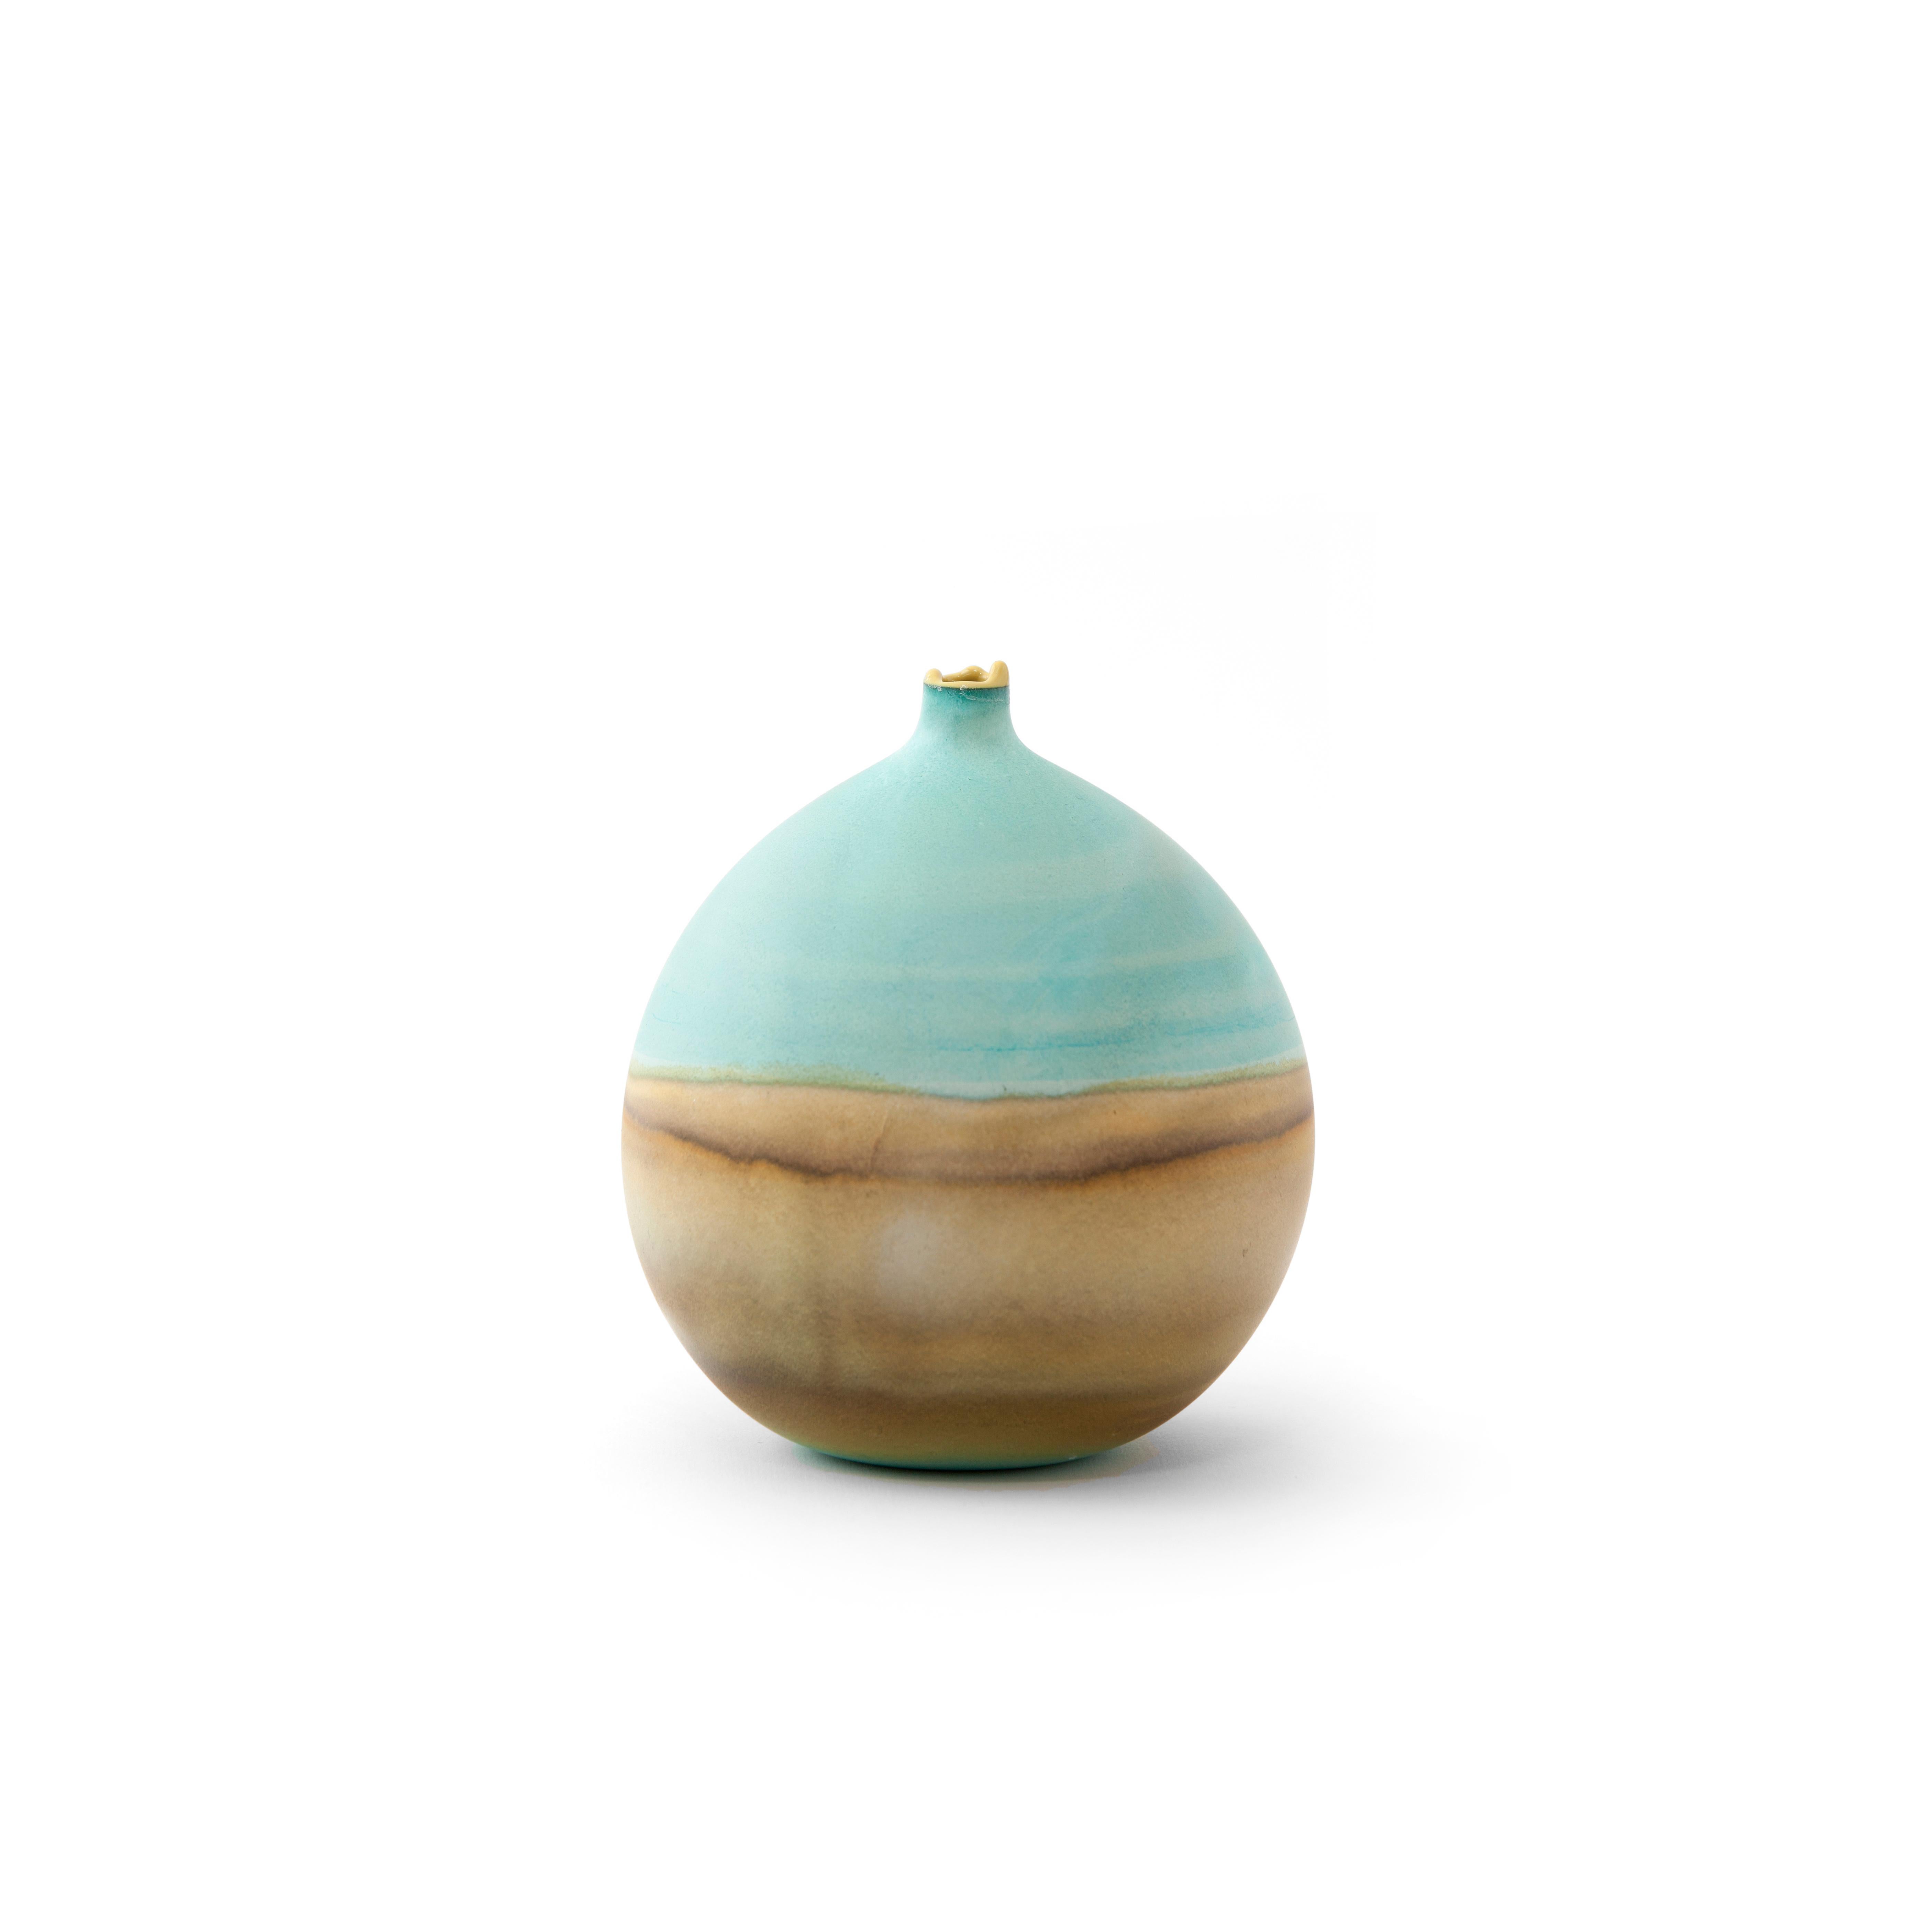 Teal and Ochre Pluto vase by Elyse Graham
Dimensions: W 13 x D 13 x H 14 cm
Materials: Plaster, Resin
MOLDED, DYED, AND FINISHED BY HAND IN LA. CUSTOMIZATION
AVAILABLE.
ALL PIECES ARE MADE TO ORDER

This collection of vessels is inspired by